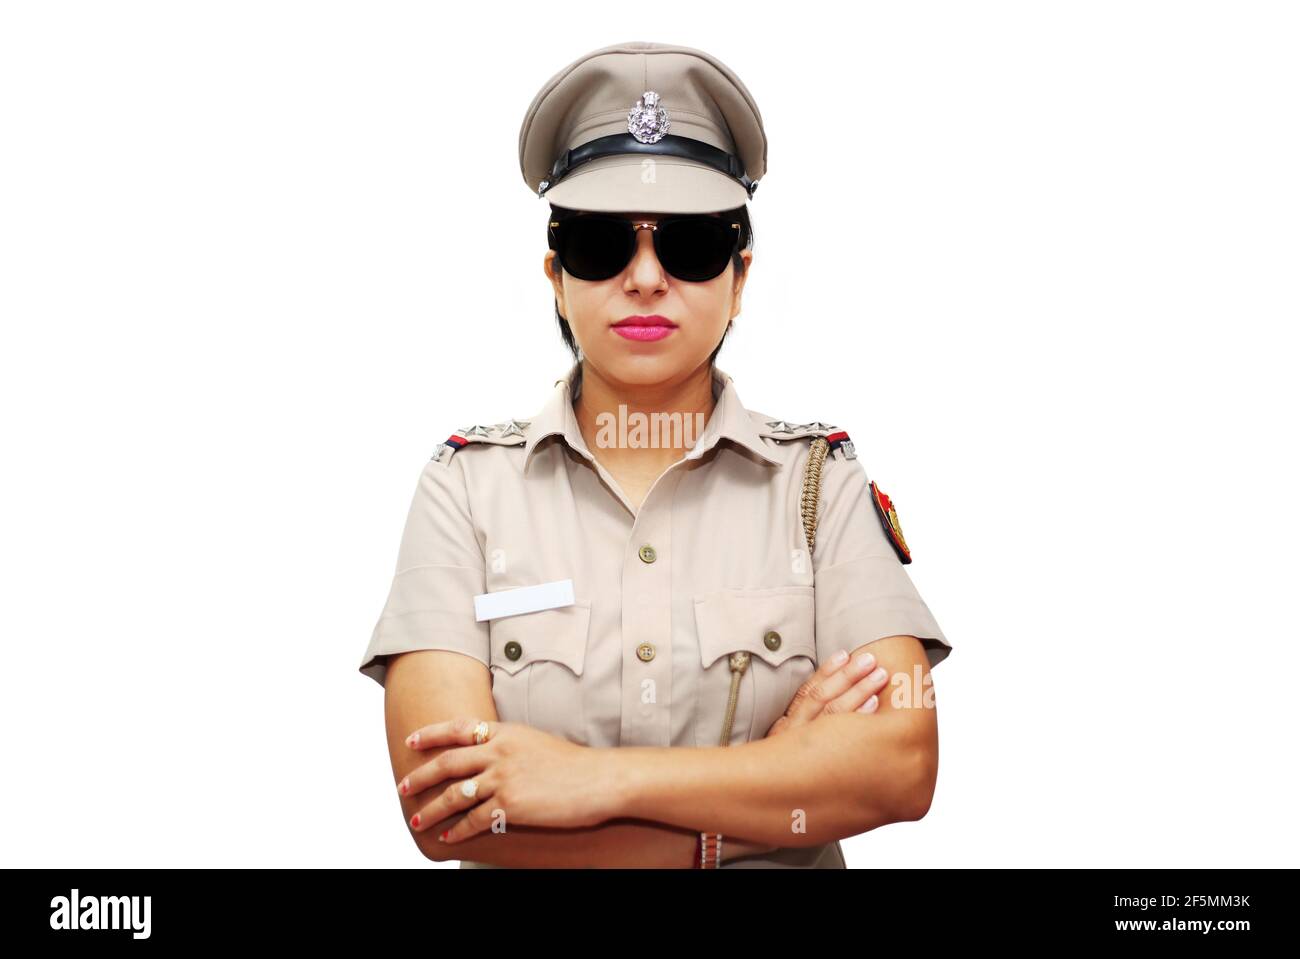 Indian policewoman standing against white background. Stock Photo